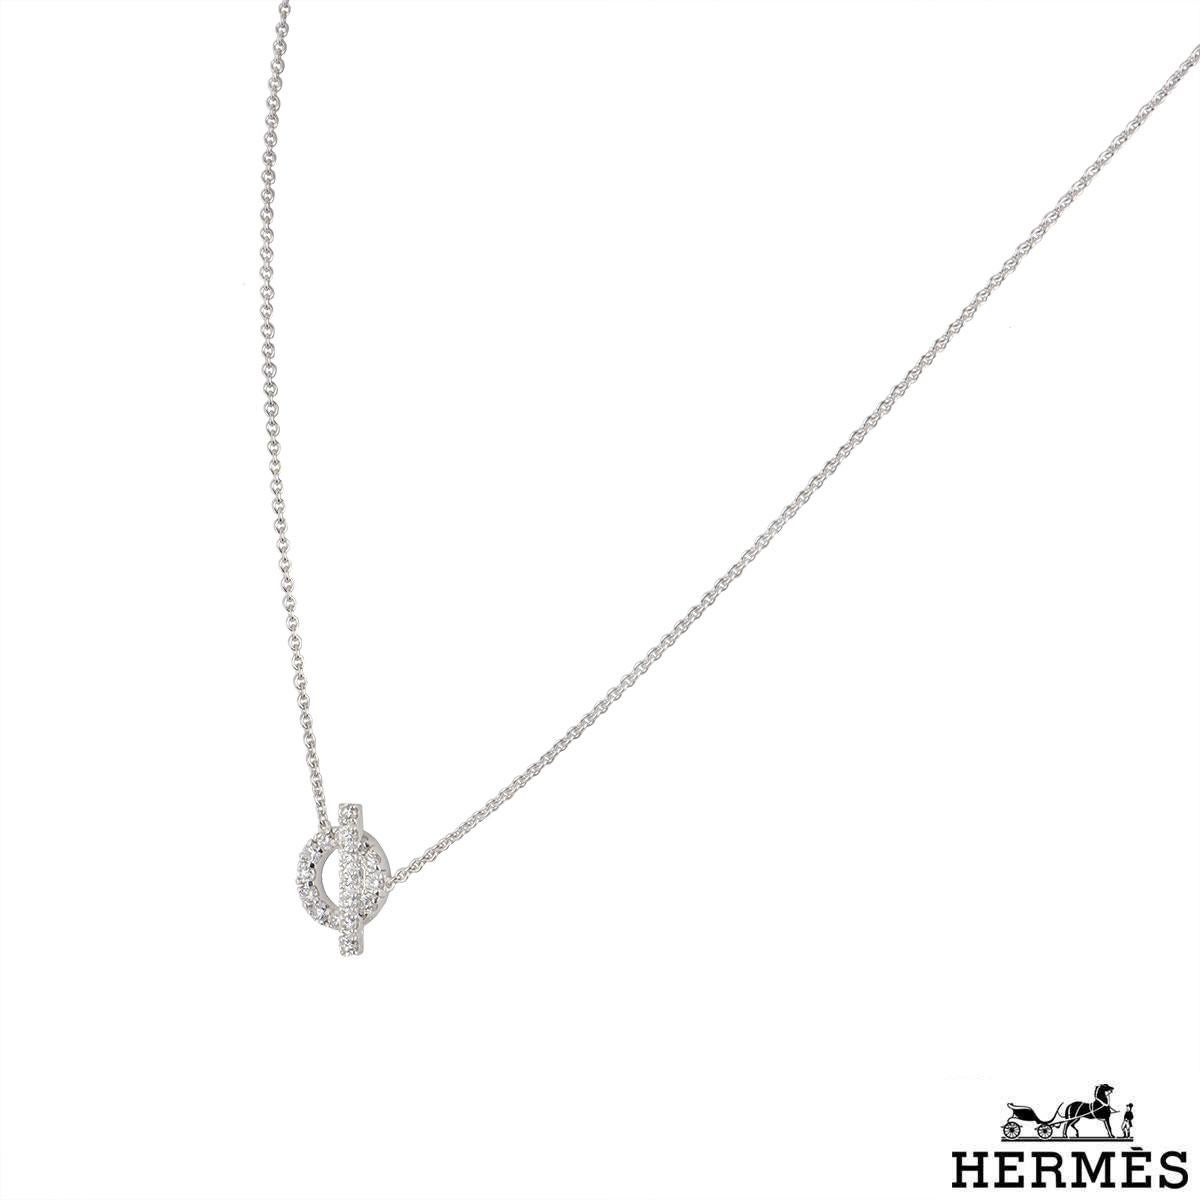 An 18k white gold diamond necklace by Hermes from the Finesse collection. The necklace features a circular motif with a bar across it set with pave round brilliant cut diamonds. The 19 diamonds have a total weight of 0.57ct. The necklace has a